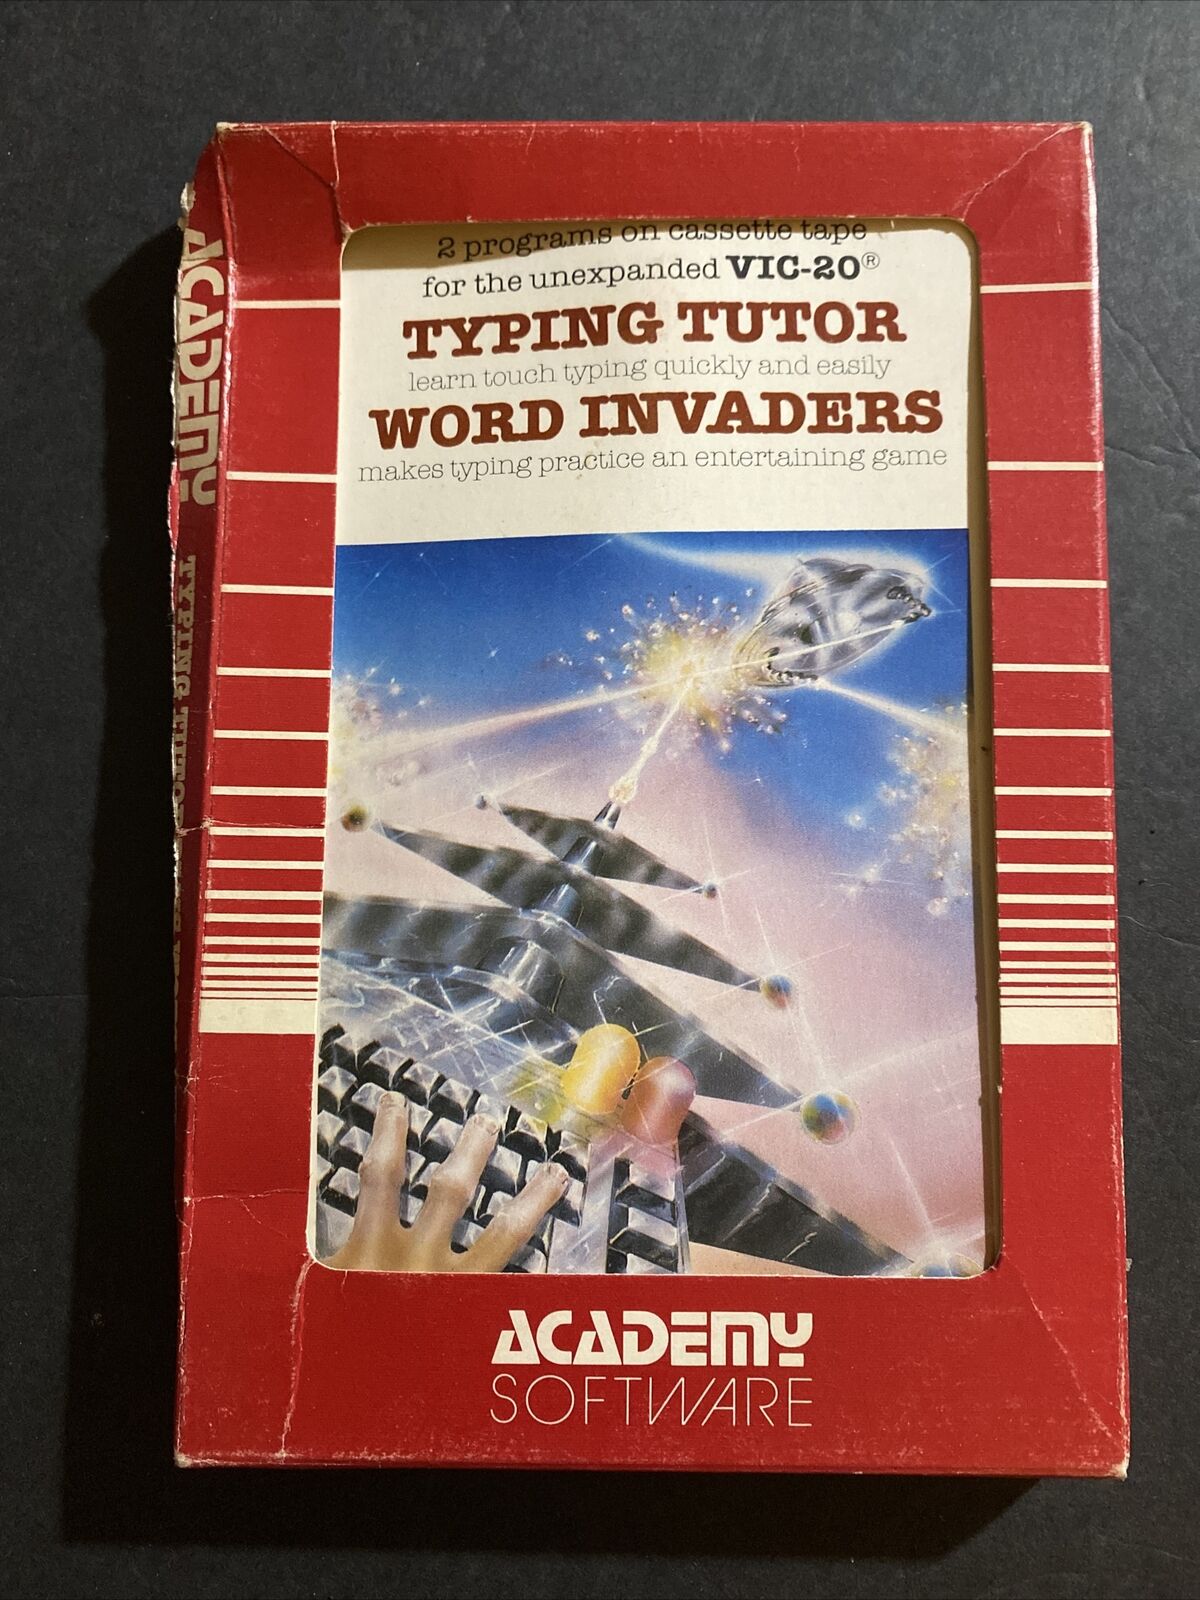 TYPING TUTOR WORD INVADERS - Commodore 64 Academy Software